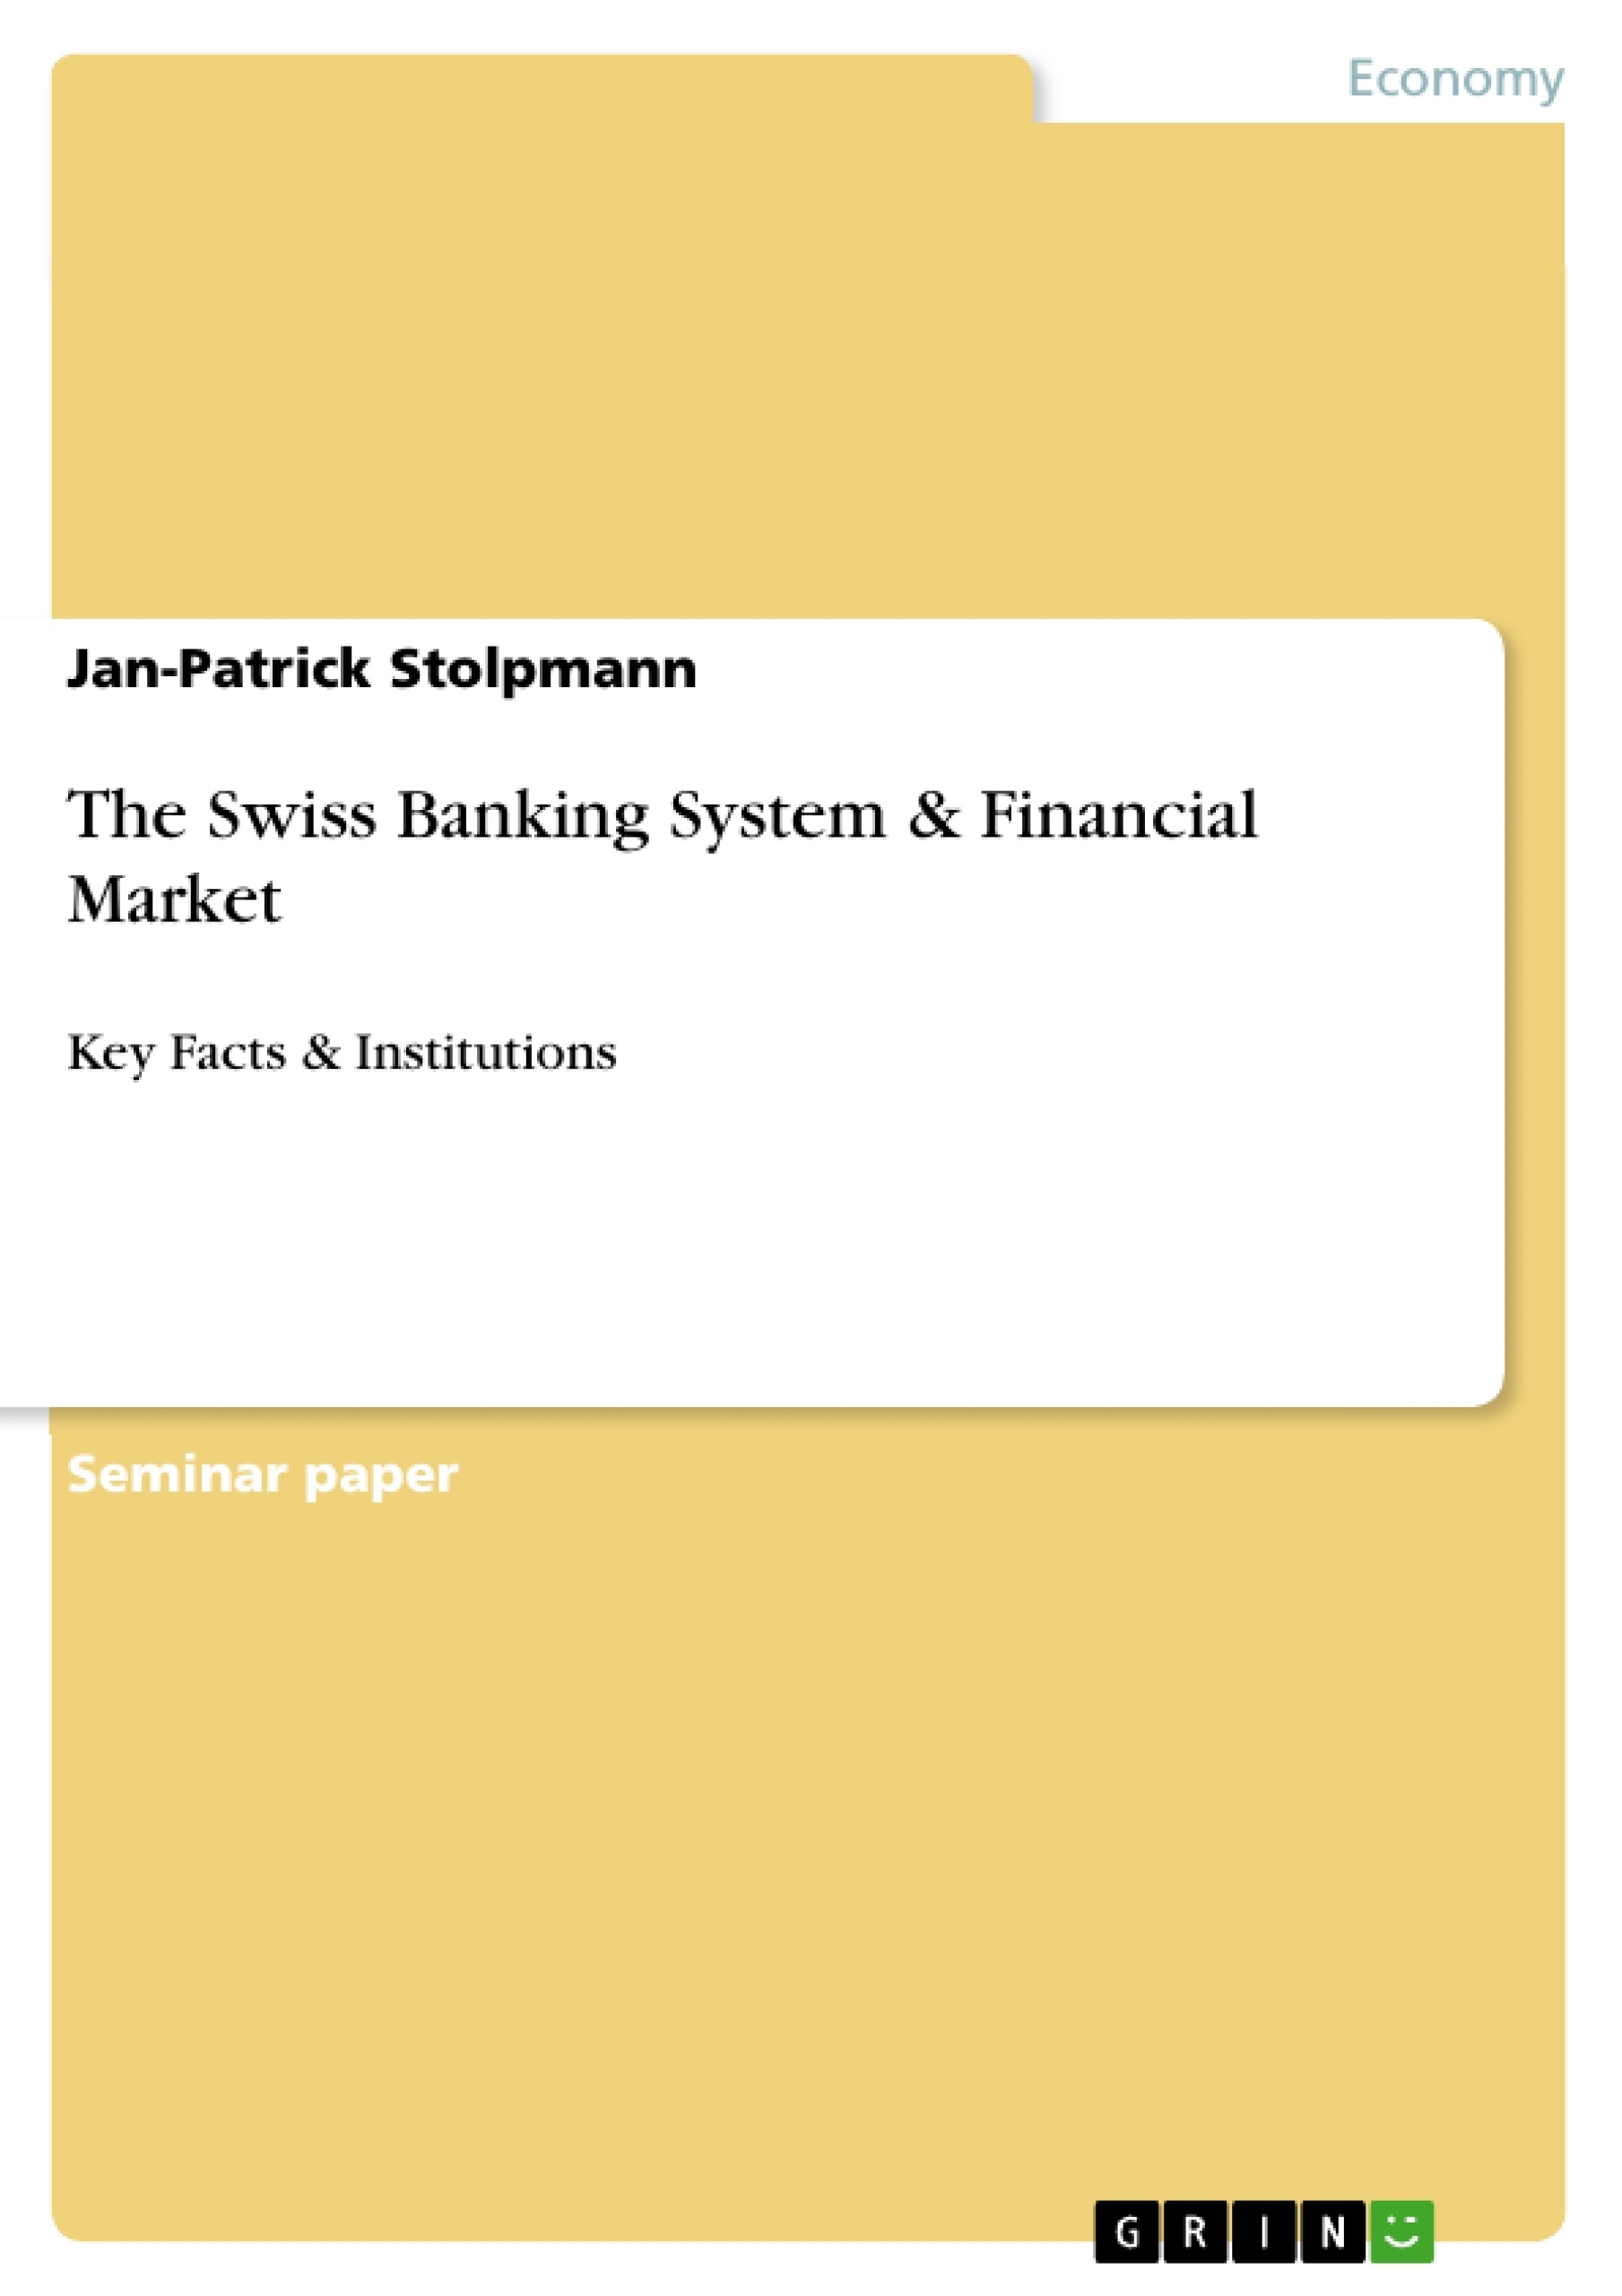 Title: The Swiss Banking System & Financial Market